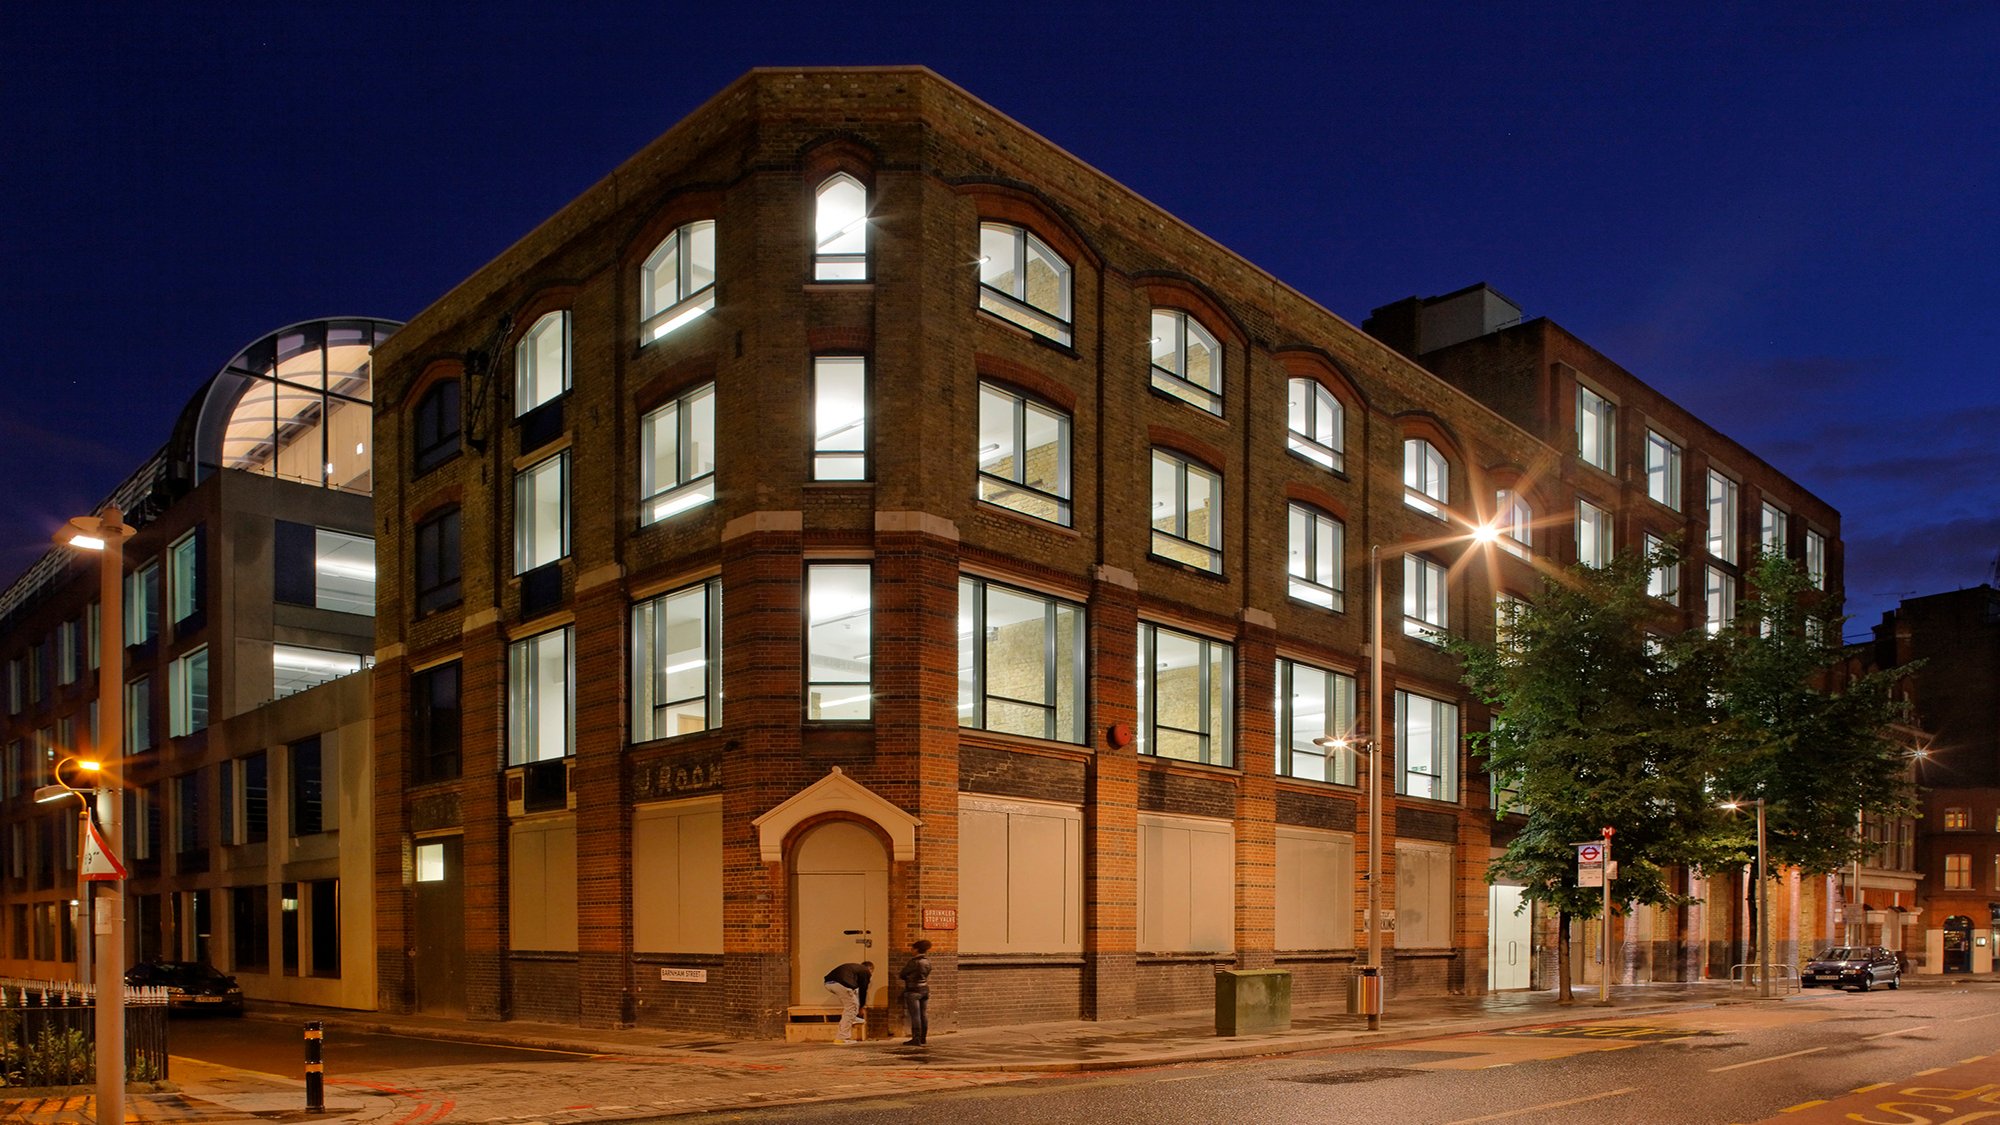 The project combined the refurbishment of Victorian warehouse buildings with a six-storey new build to create an energy-efficient office building.